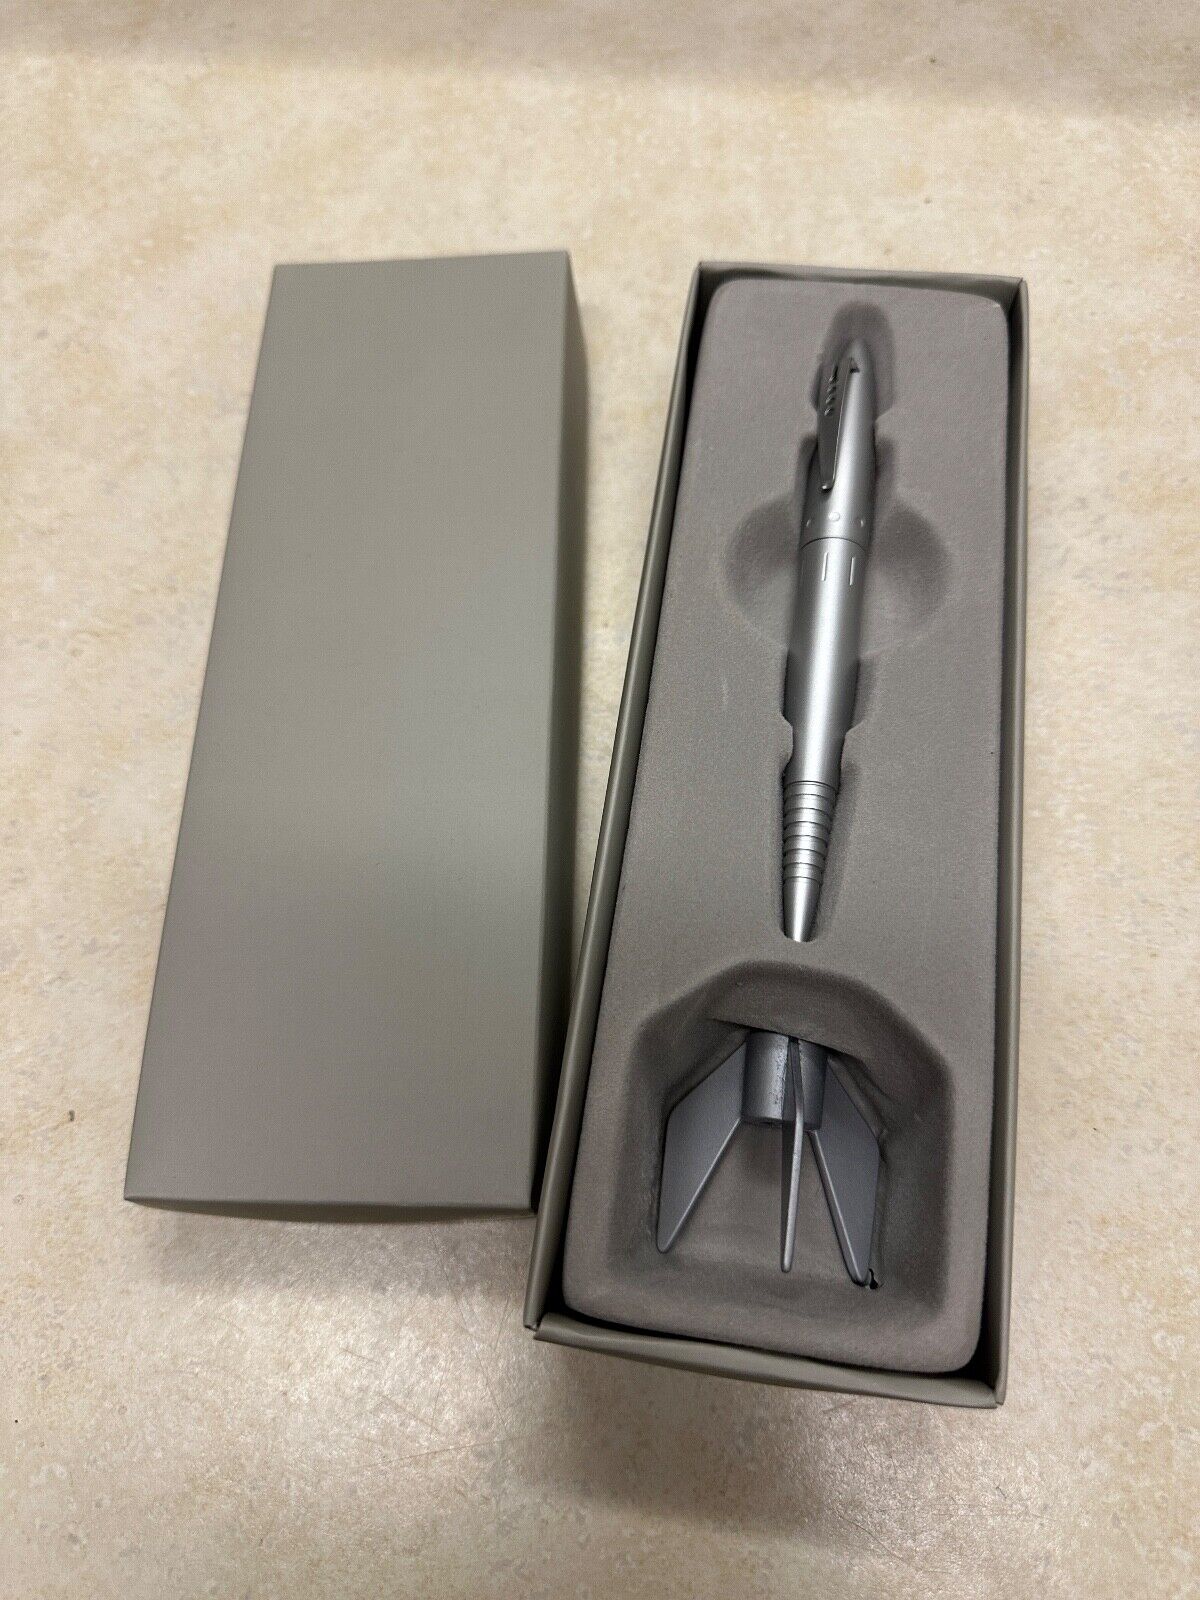 SpaceX Rocket Pen New In Box